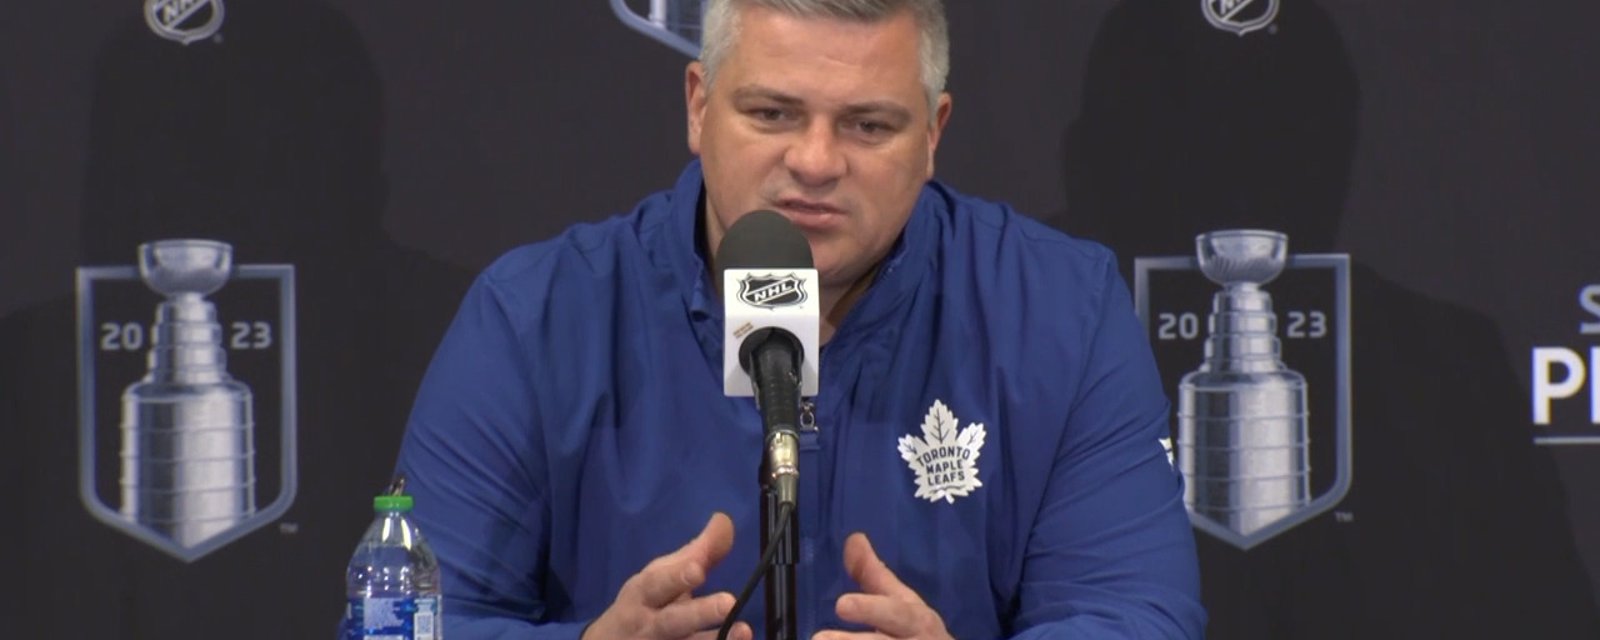 Maple Leafs’ Sheldon Keefe with controversial statement ahead of Game 4